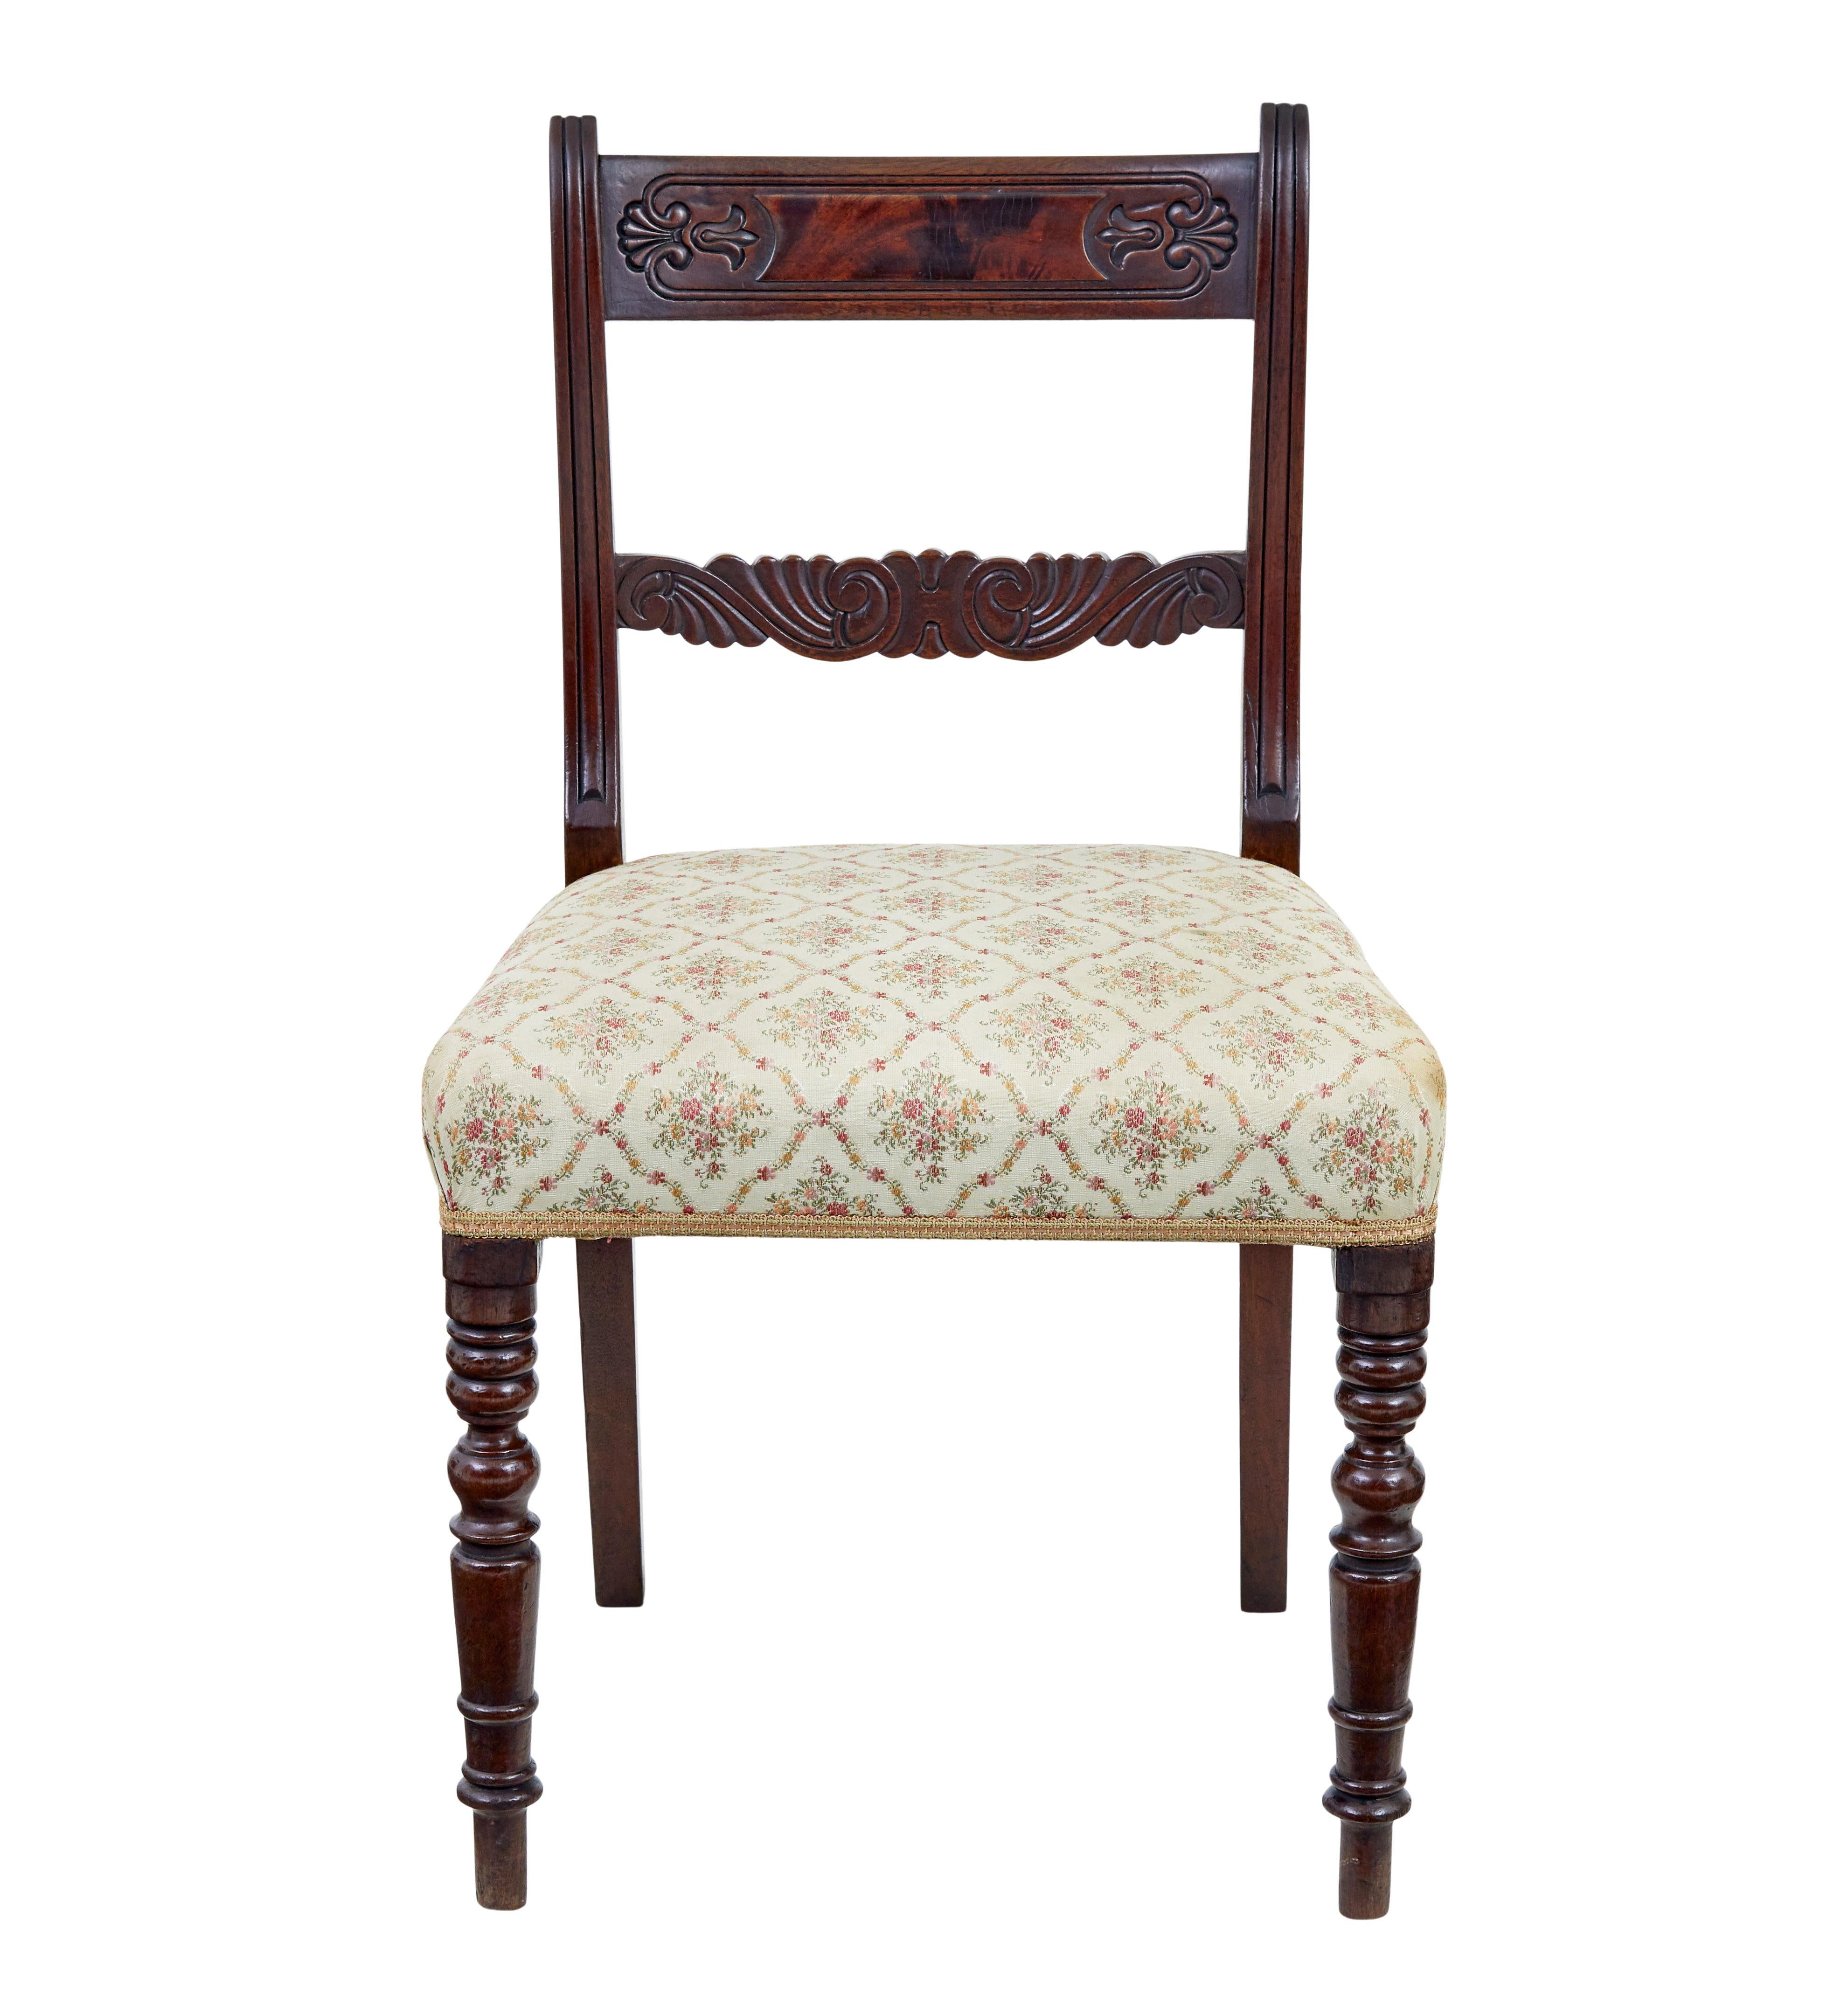 Set of 19th century regency mahogany dining chairs circa 1820.

Good quality set of 6 regency dining chairs, made in fine mahogany. Carved back rests with further carved support rail and channeled detailing. Overstuffed seats. Standing on front